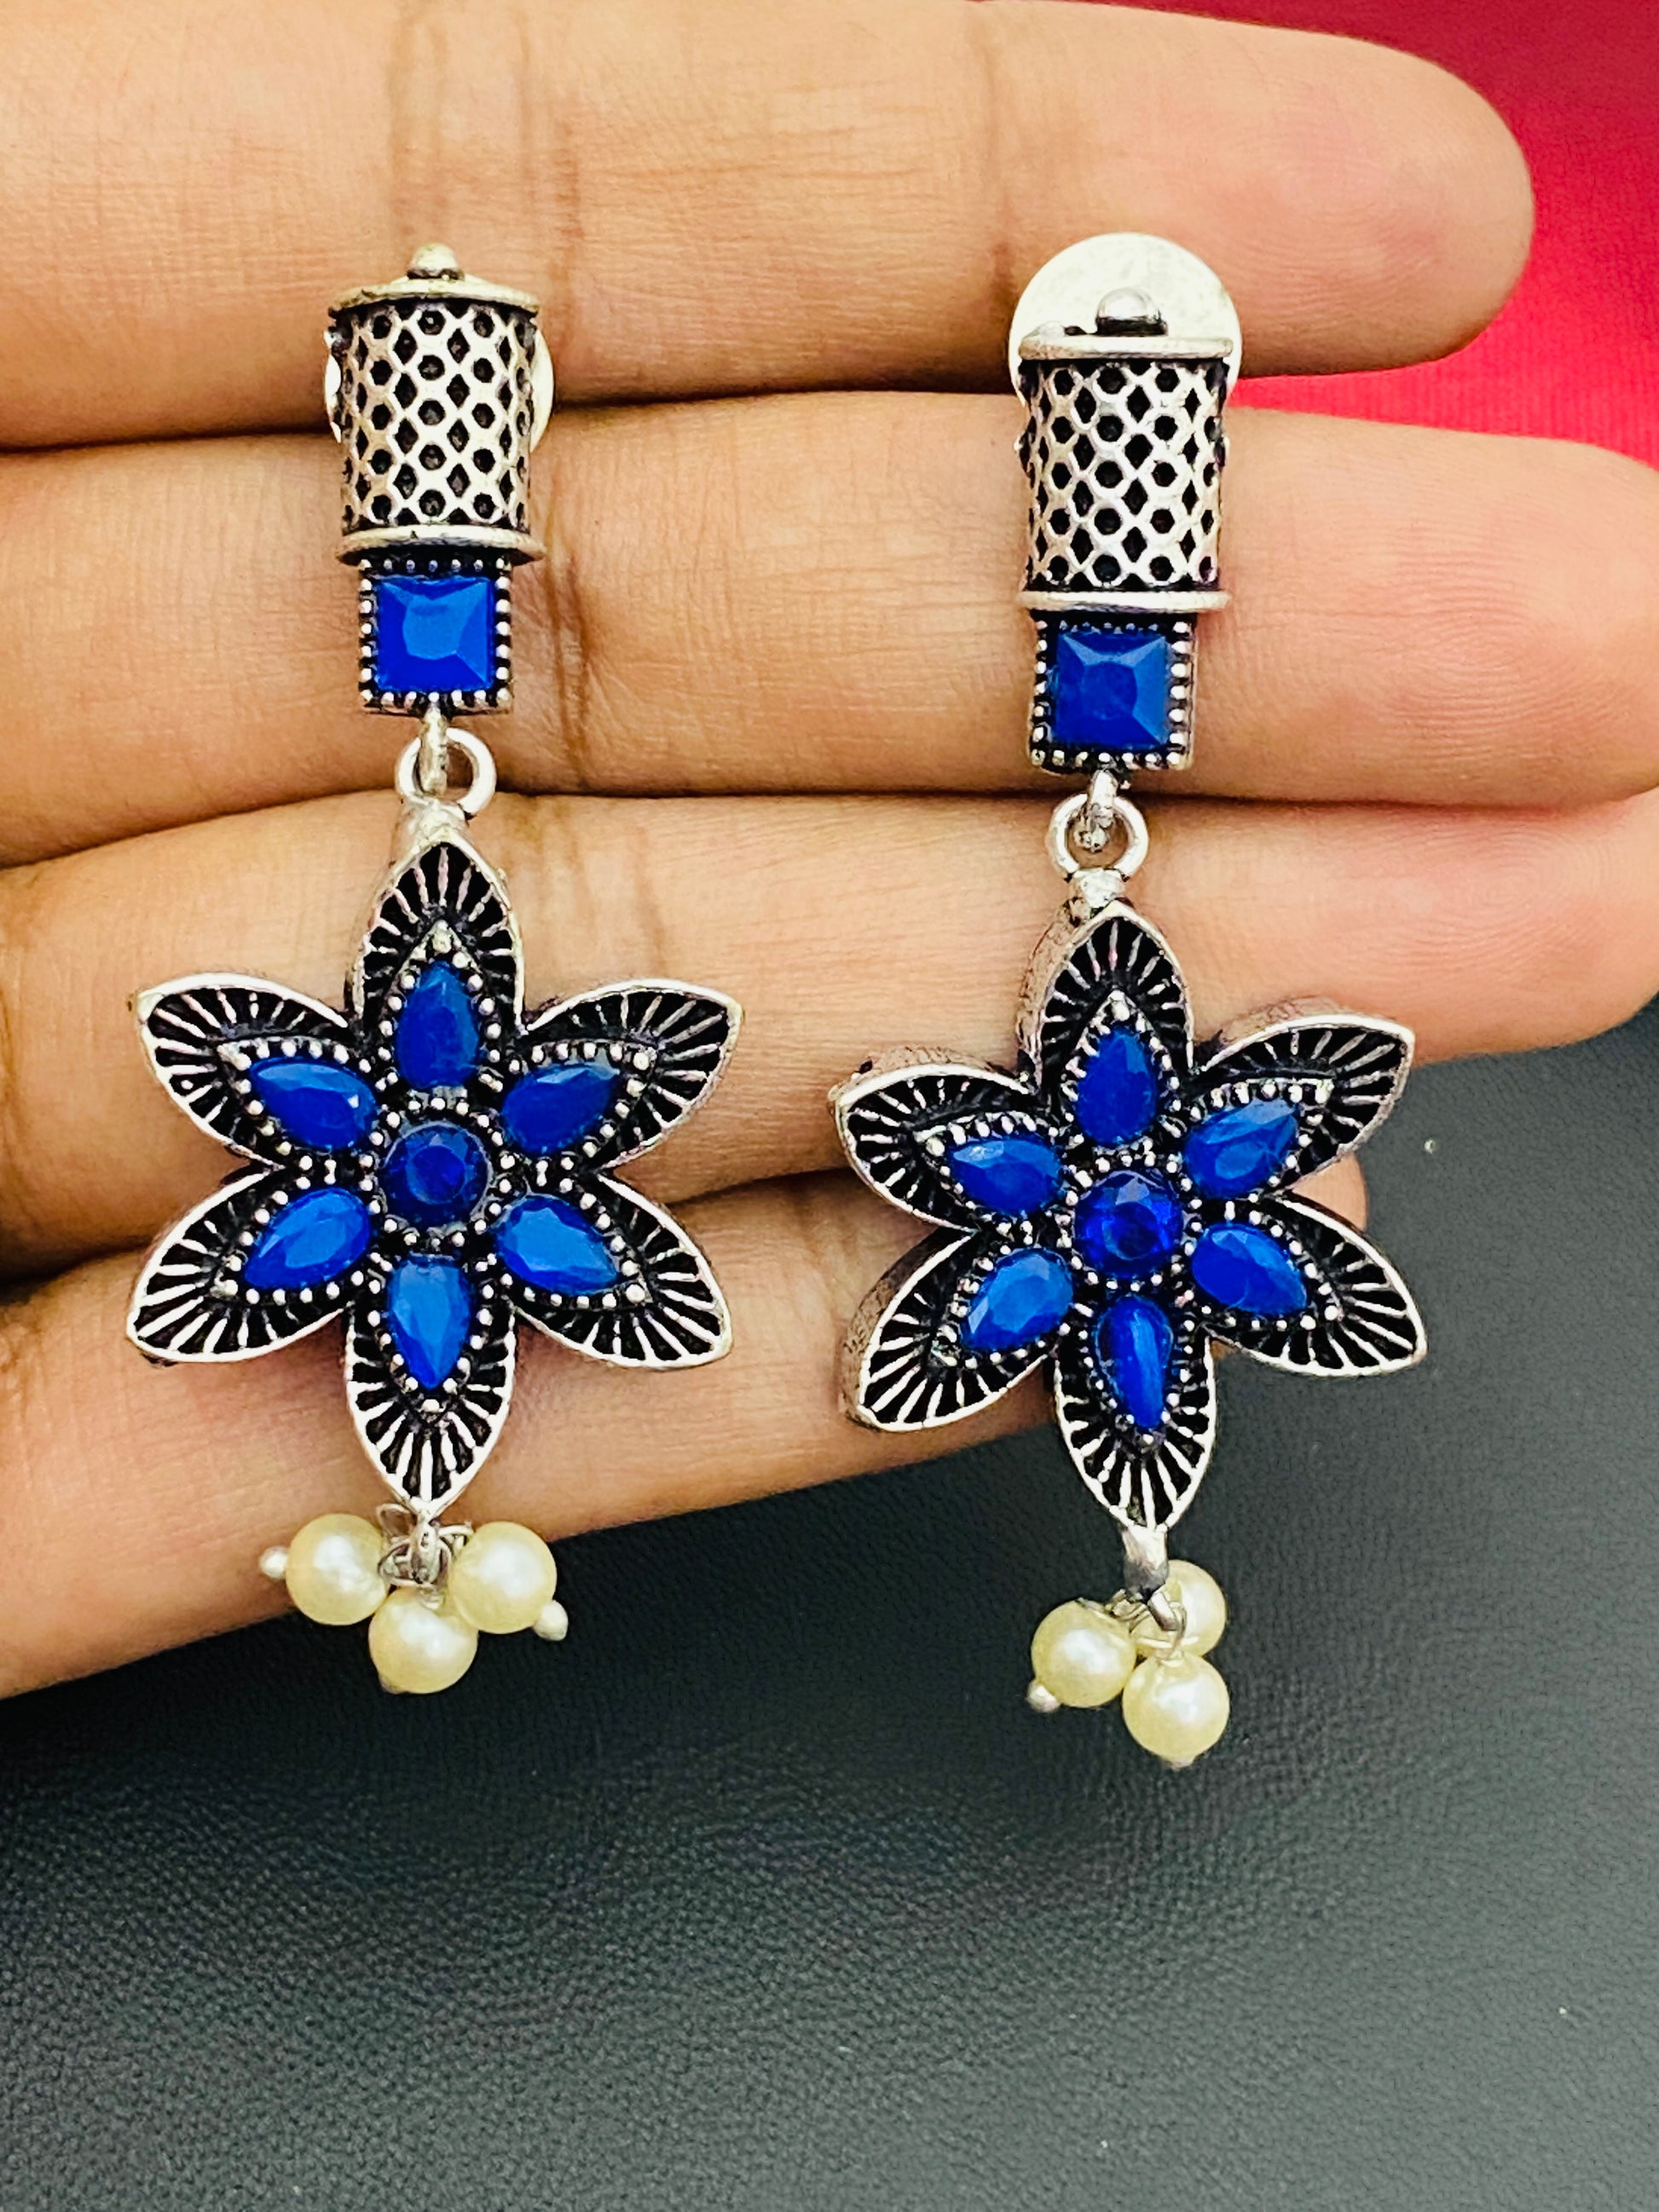 Blue Stoned Necklace With Earrings In USA